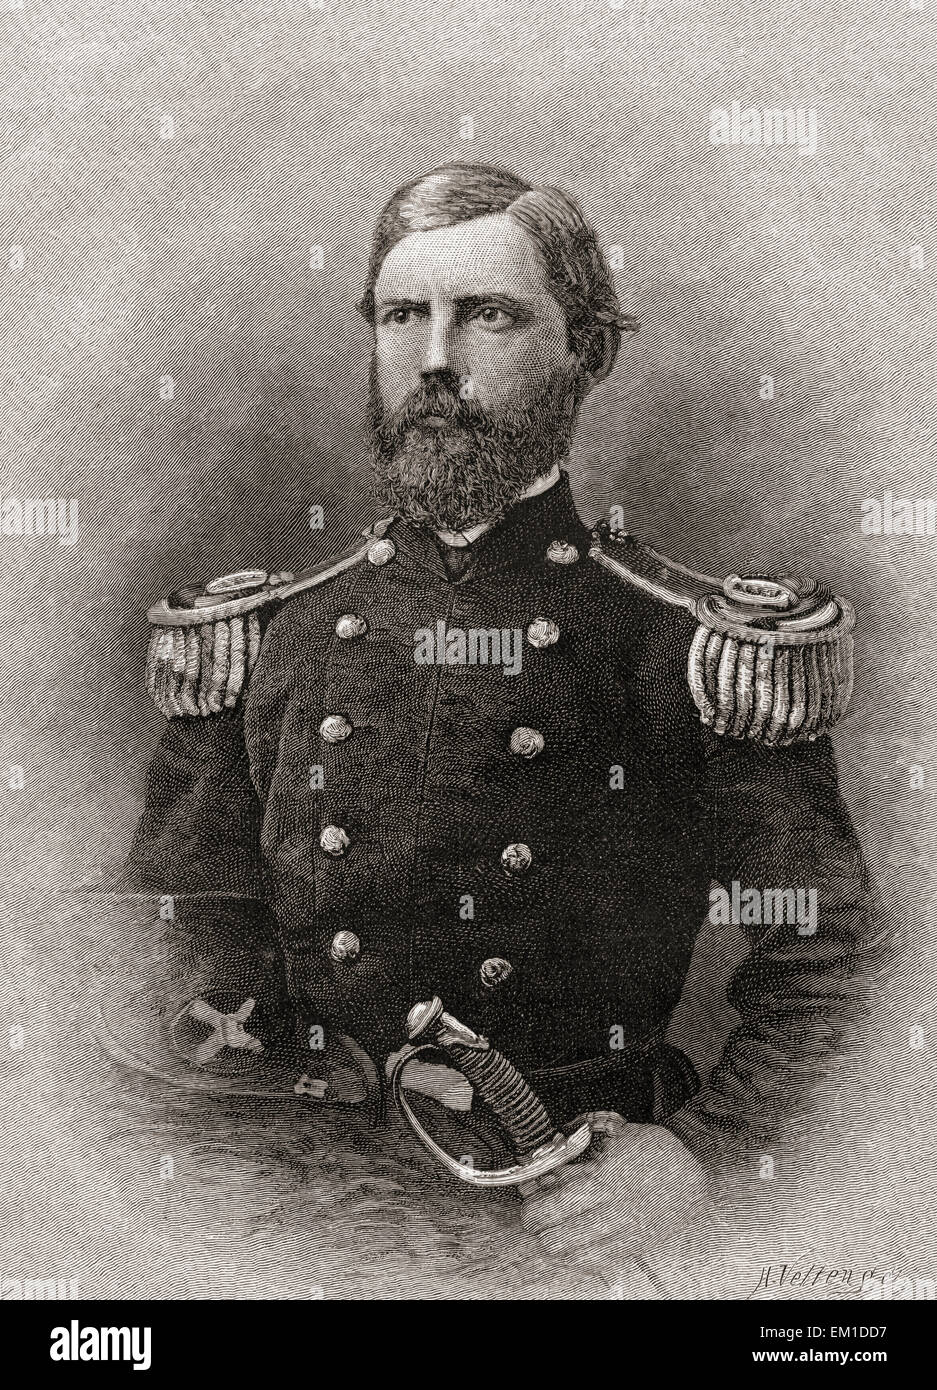 John Fulton Reynolds , 1820 – 1863.  Career United States Army officer and a general in the American Civil War. Stock Photo